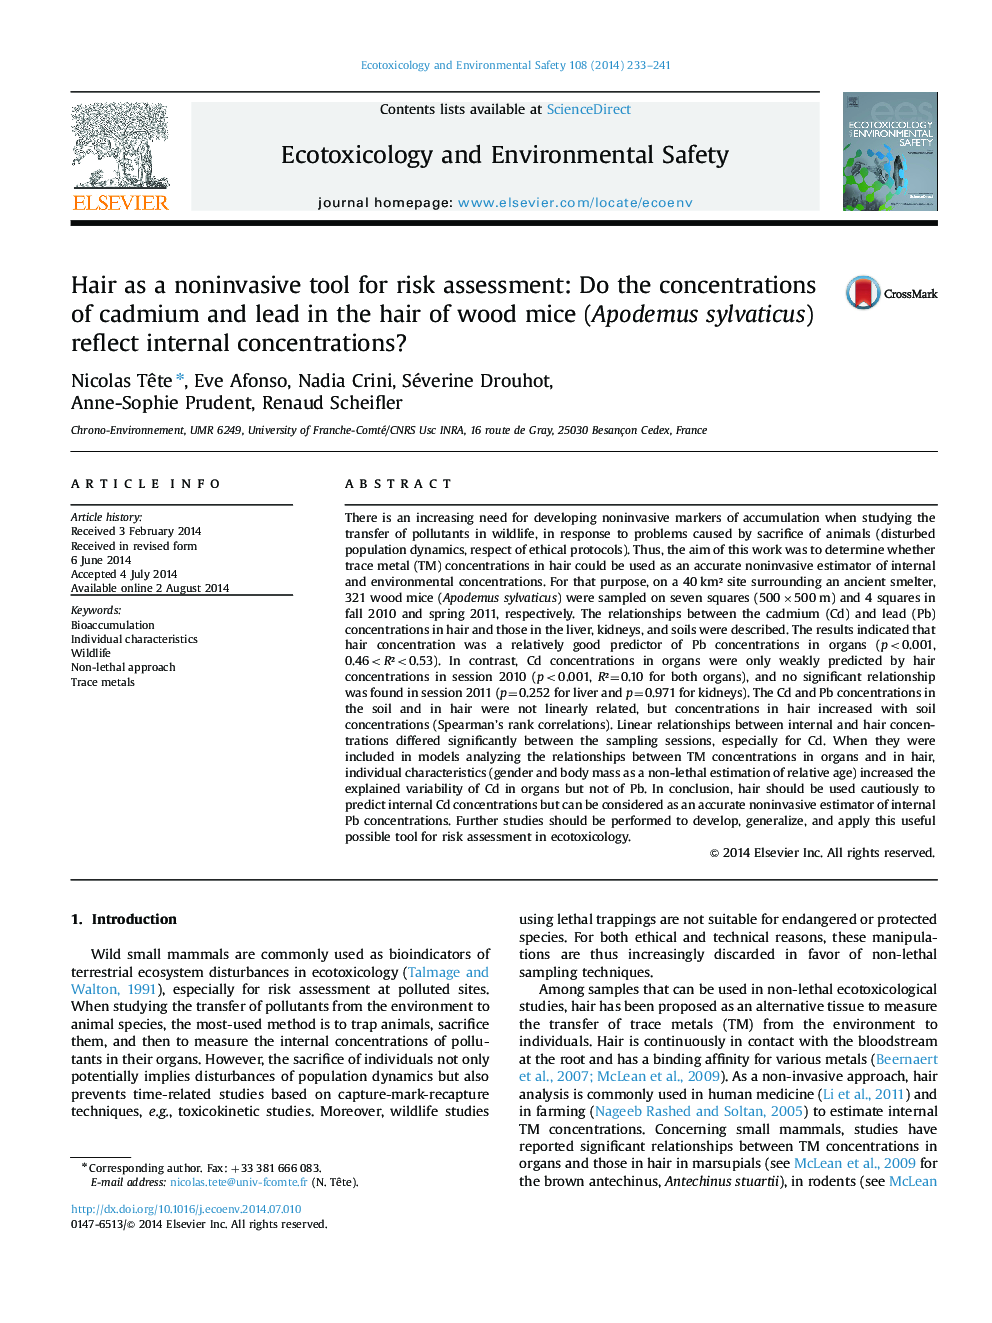 Hair as a noninvasive tool for risk assessment: Do the concentrations of cadmium and lead in the hair of wood mice (Apodemus sylvaticus) reflect internal concentrations?